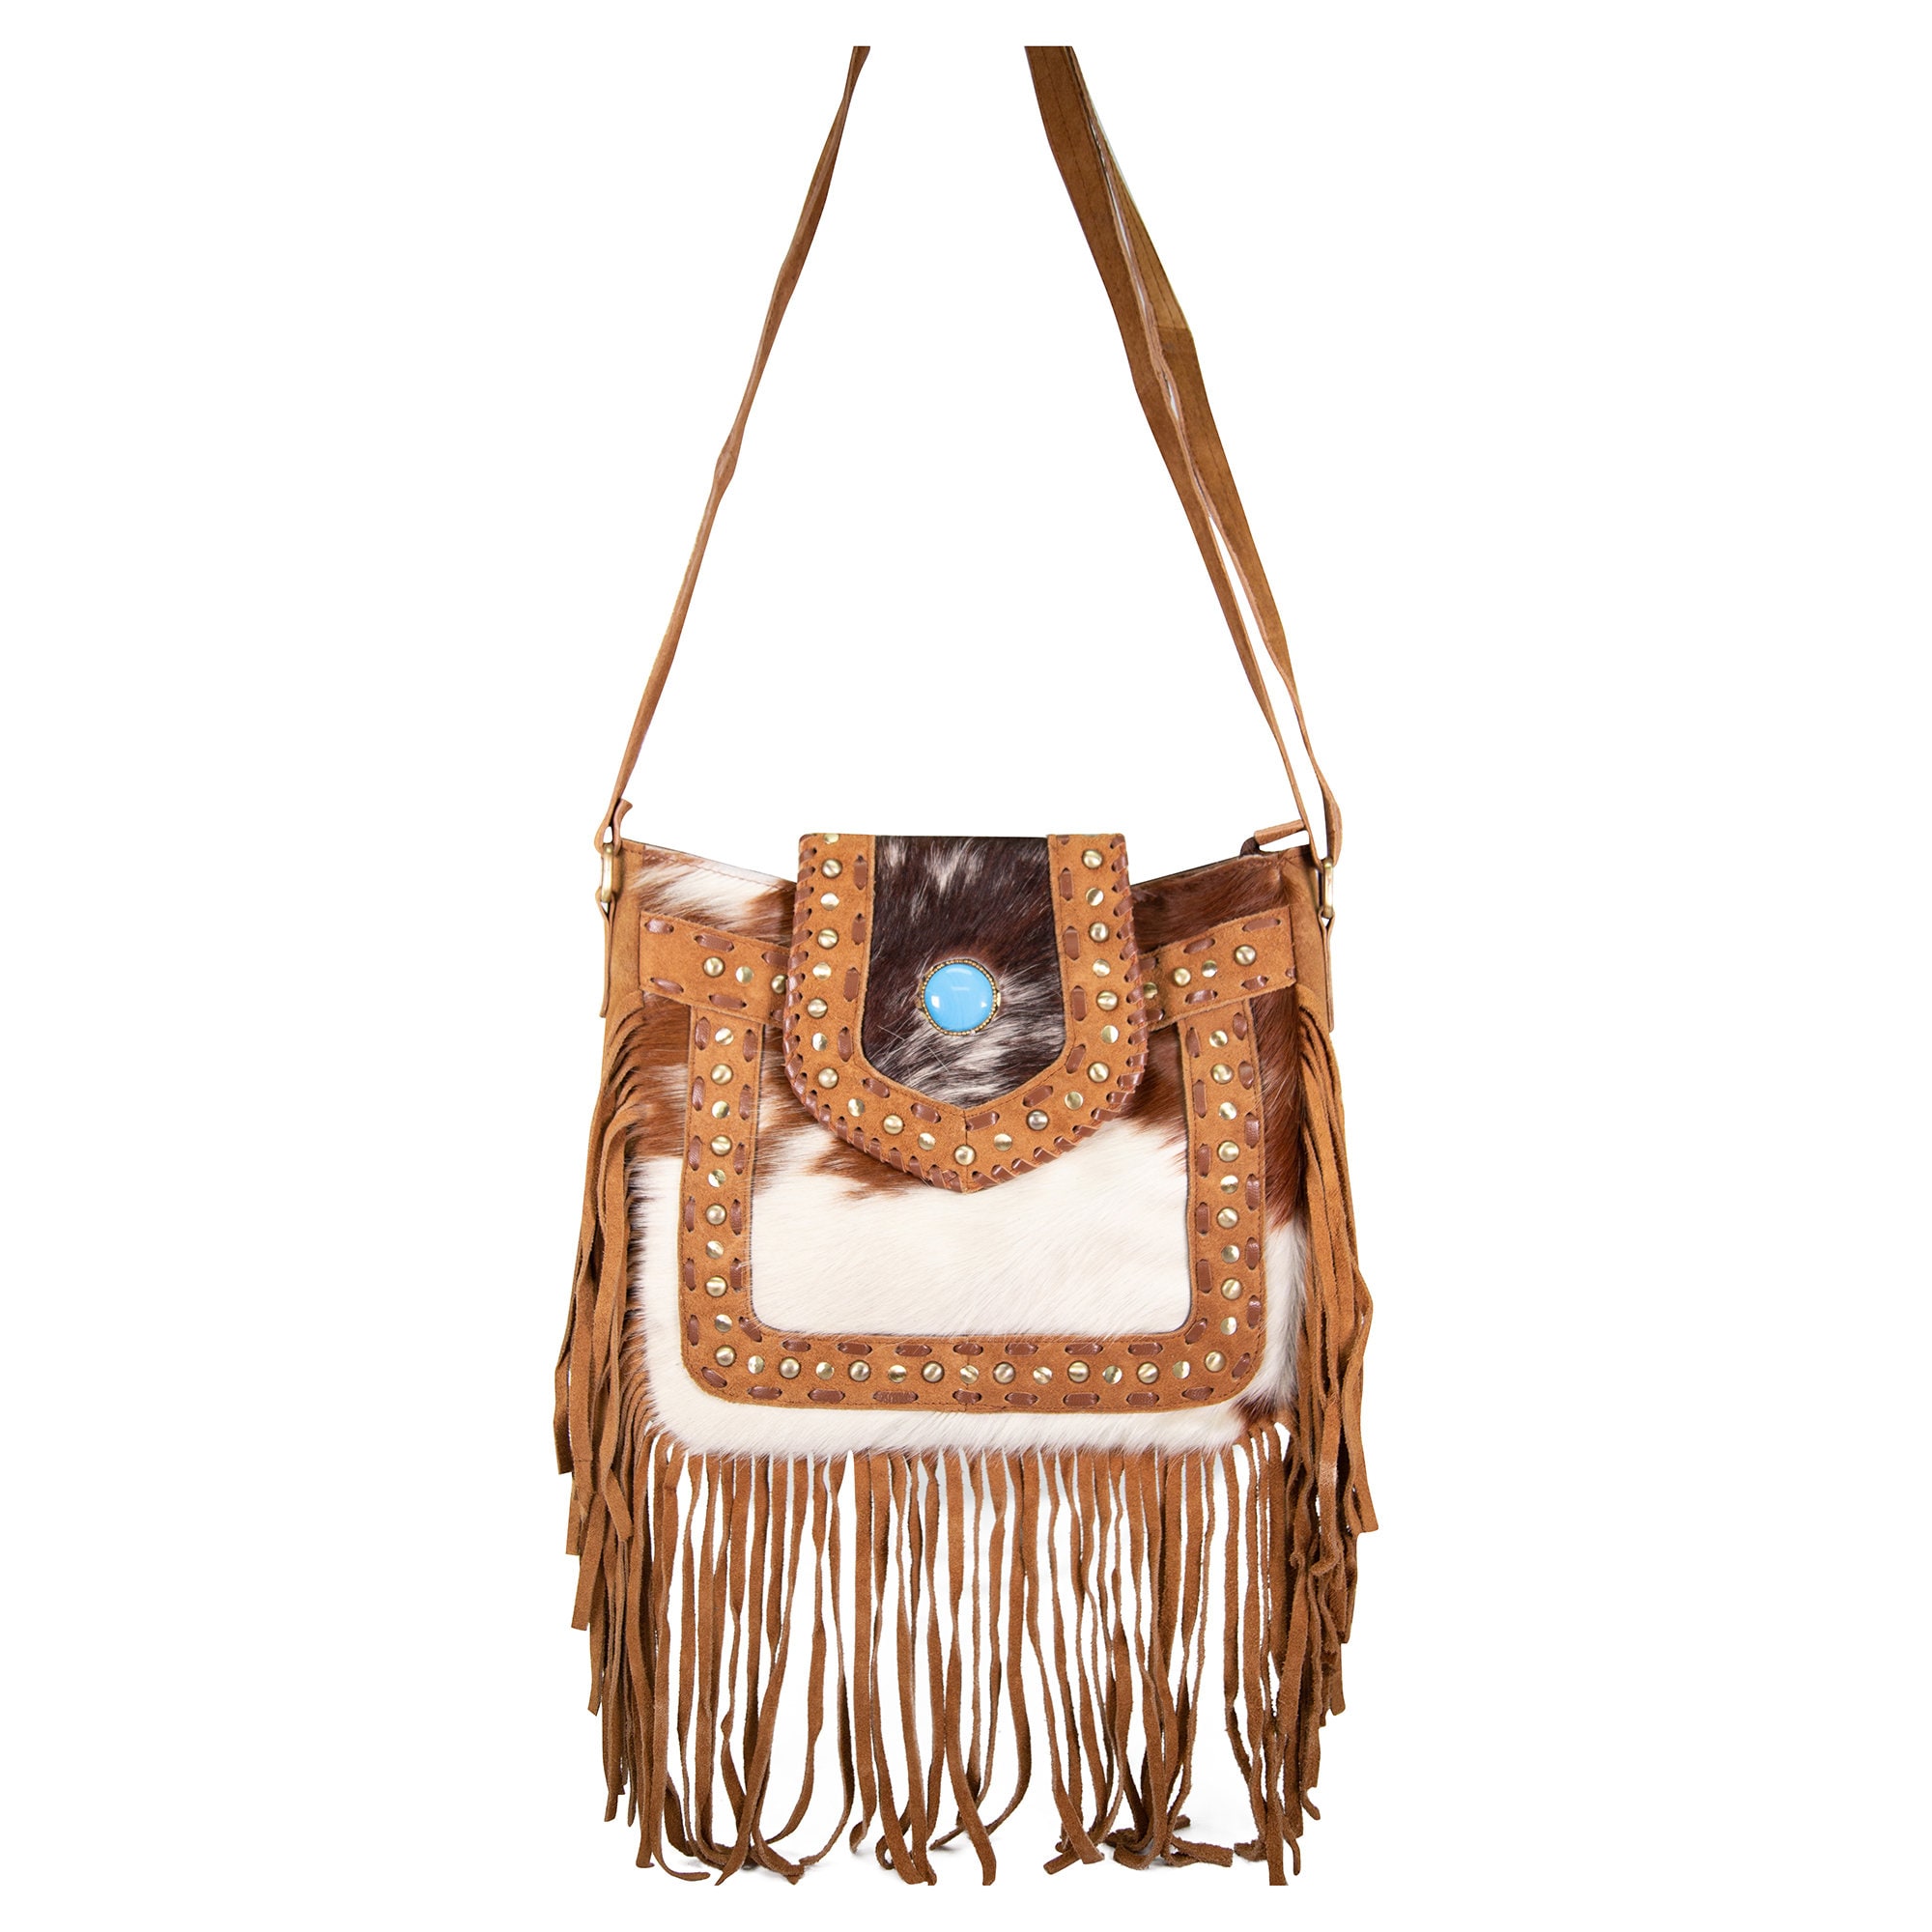 Beautiful re-imagined Louis Vuitton purses and bags by Vintage Boho - Large Leather  fringed bag …